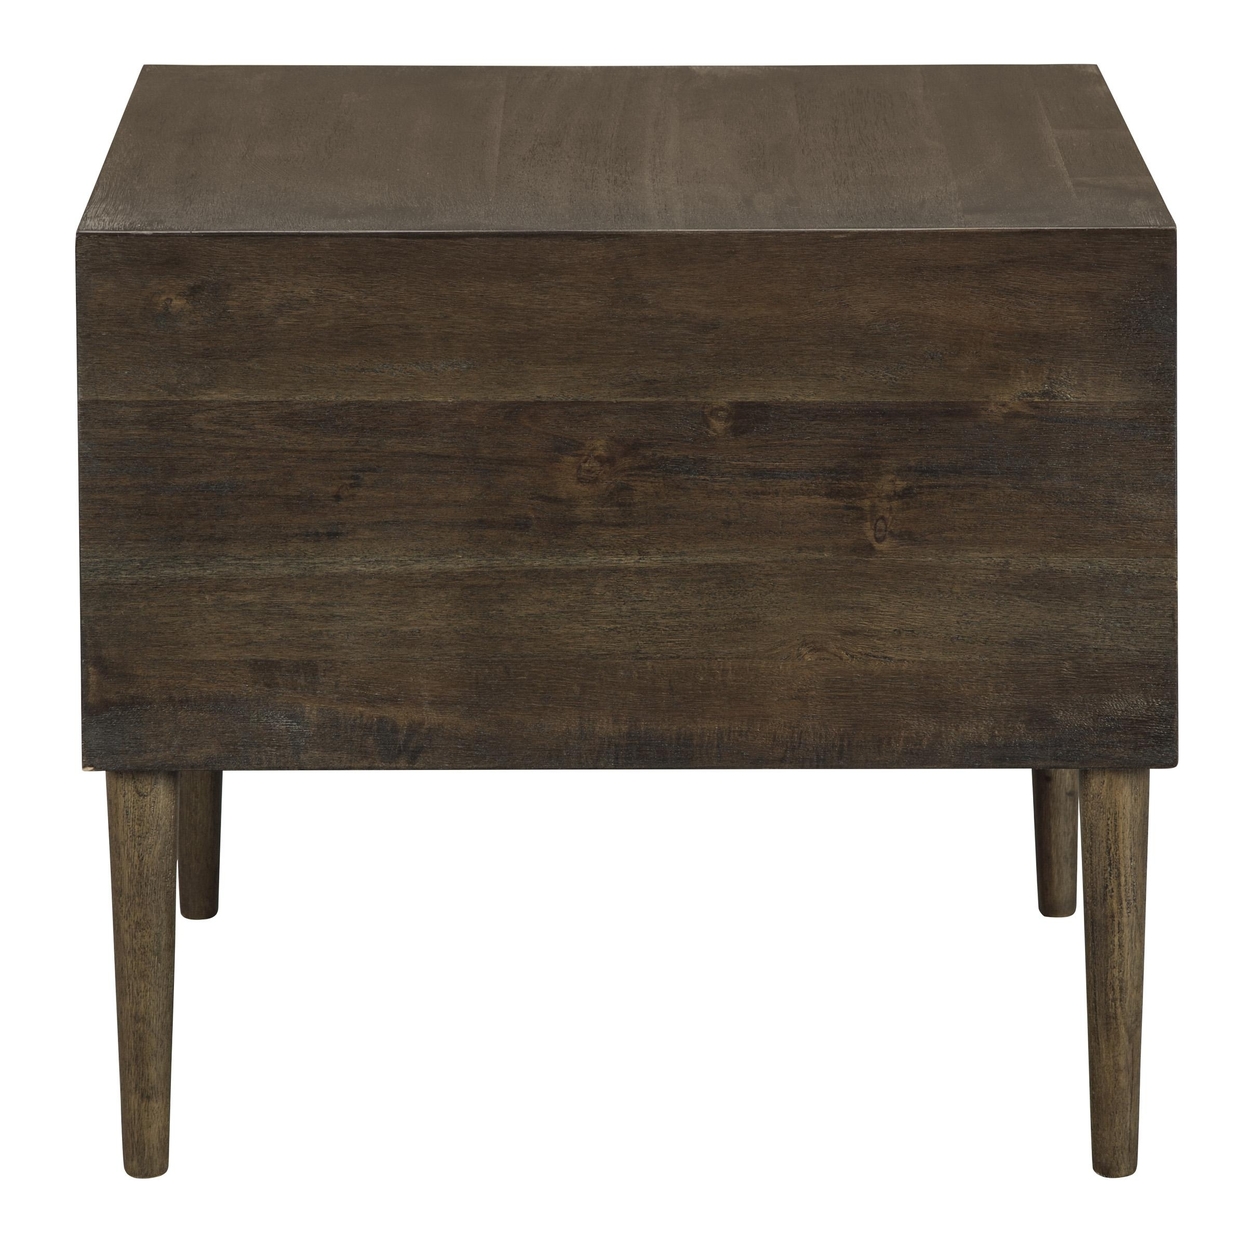 Square Wooden Frame End Table With Tapered Legs And Metal Pulls, Brown- Saltoro Sherpi